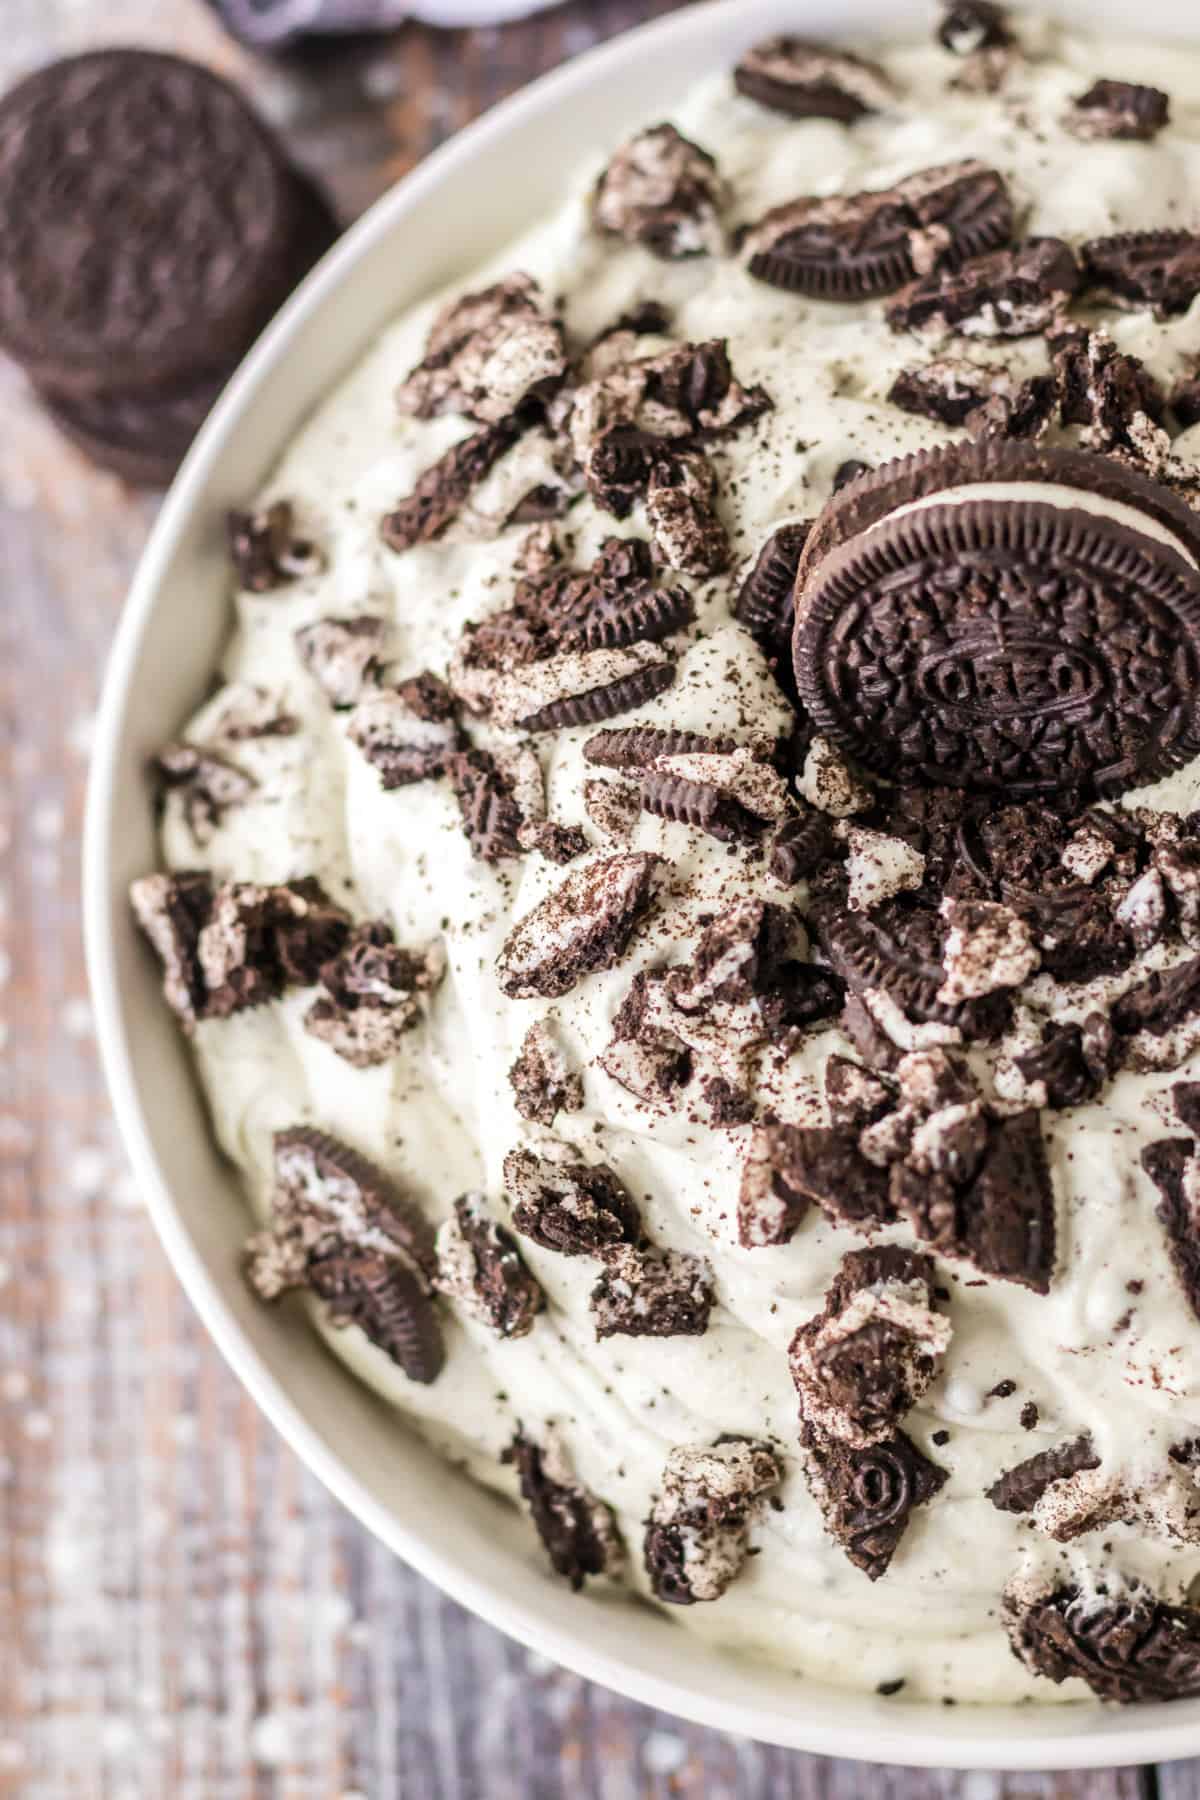 Creamy oreo fluff dessert topped with additional oreo pieces.